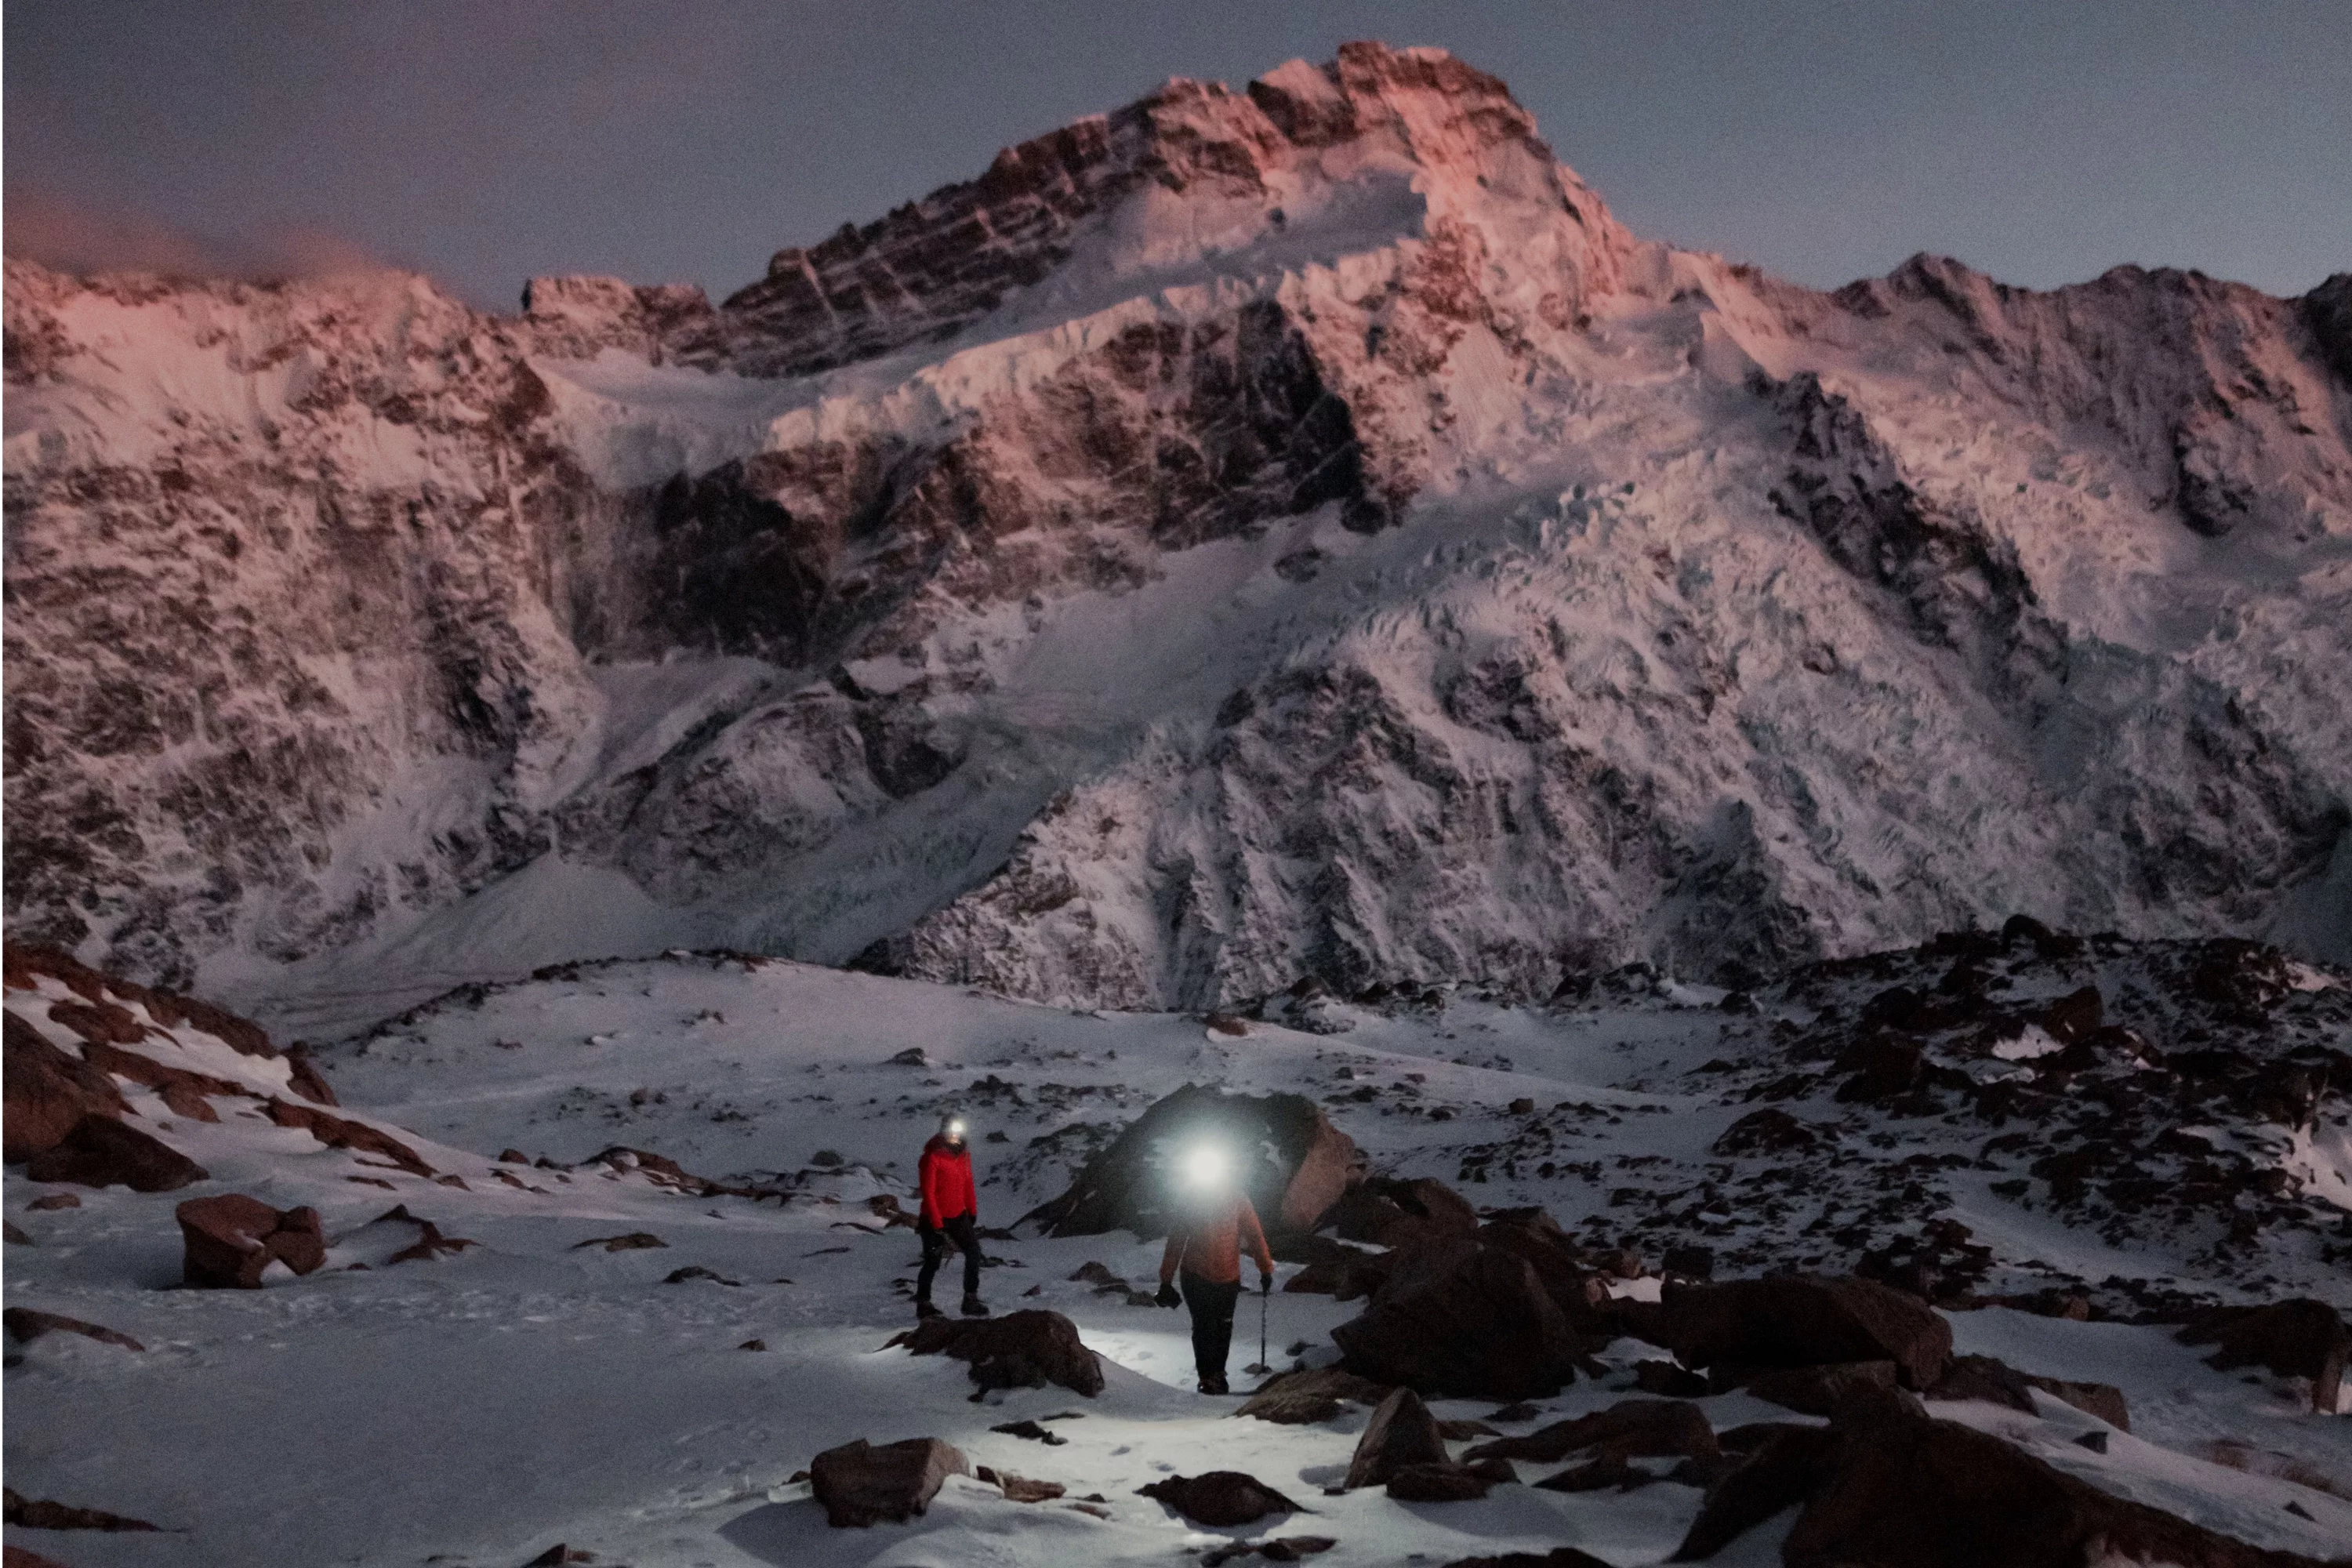 Hiking in snow with a headlamp